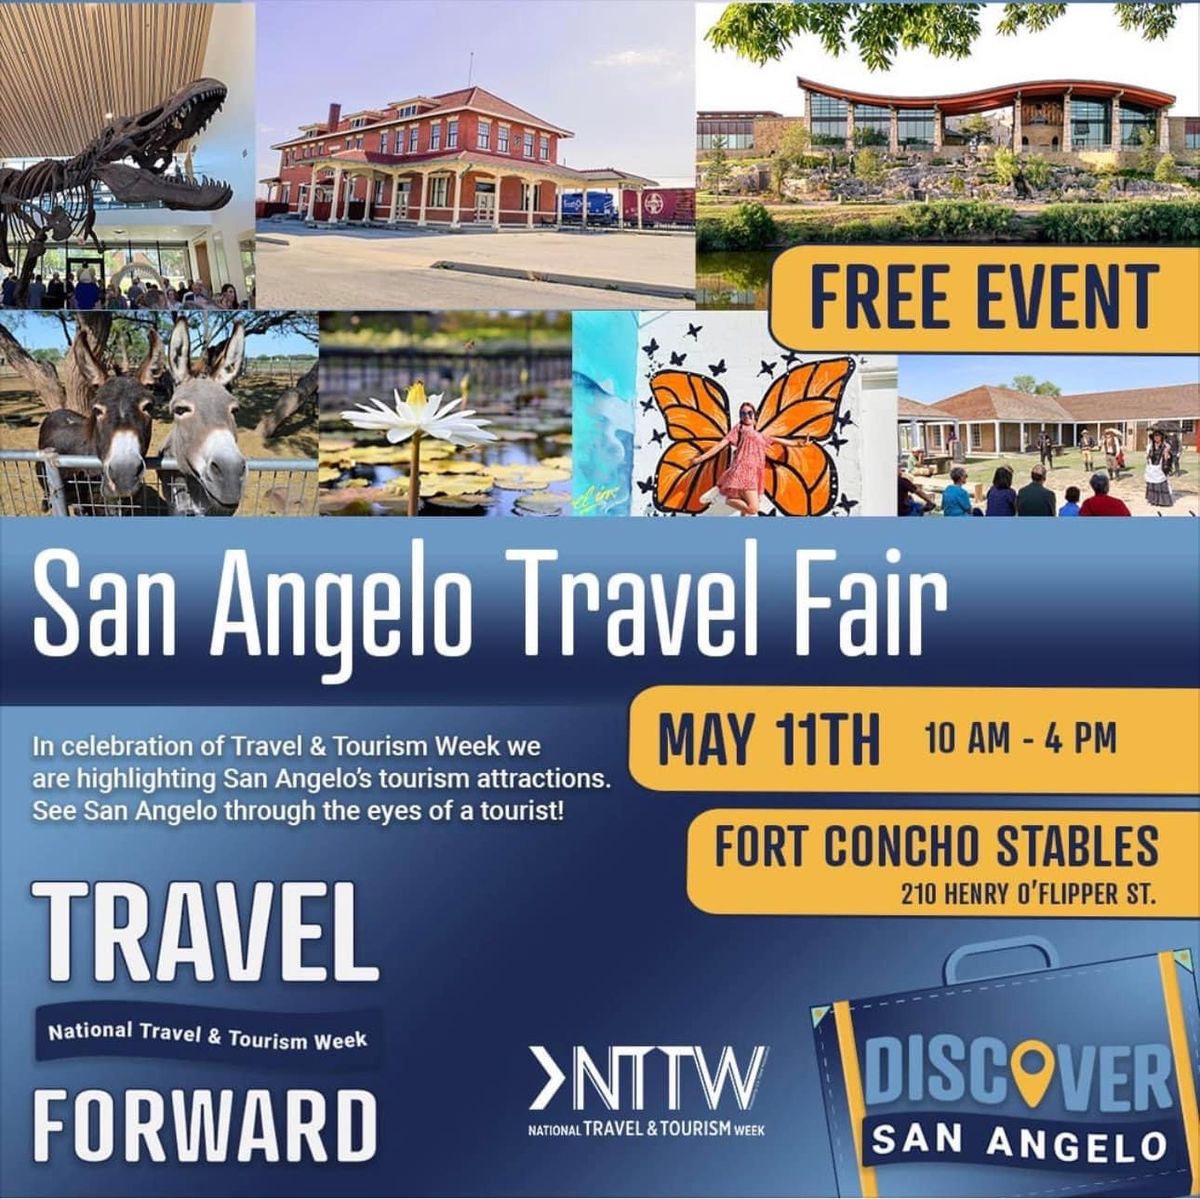 San Angelo Today: 1st Annual Travel Fair to be held at Fort Concho Stables